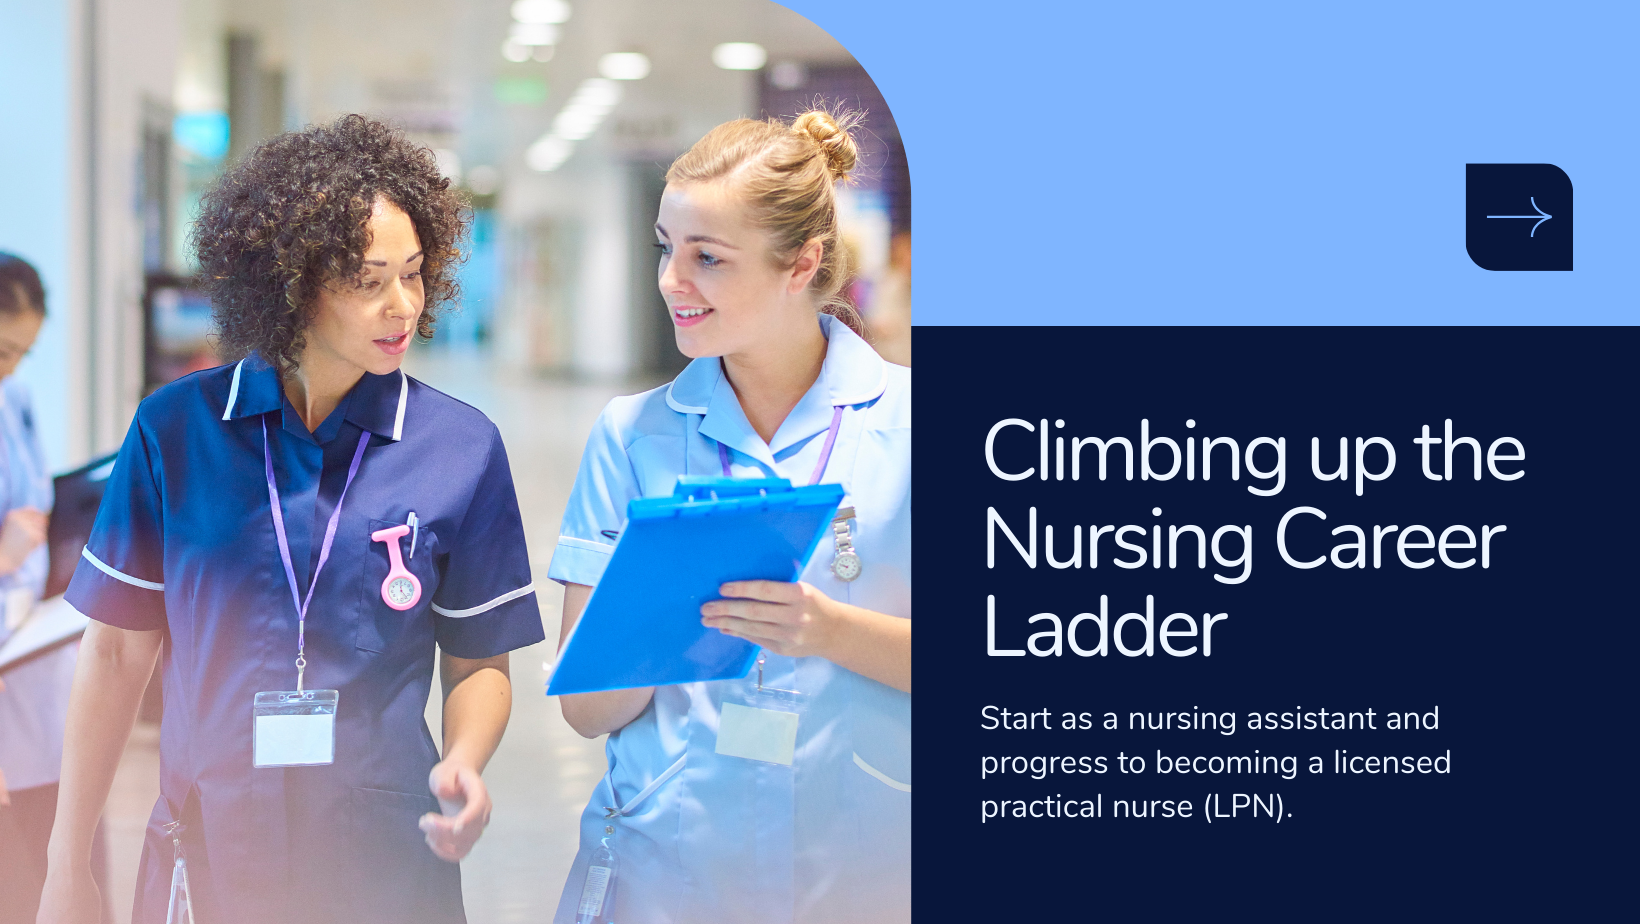 An image showing the nursing career ladder with a person starting as a nursing assistant, then becoming a licensed practical nurse (LPN), and finally reaching the top as a Registered Nurse (RN) after completing the necessary education and training.